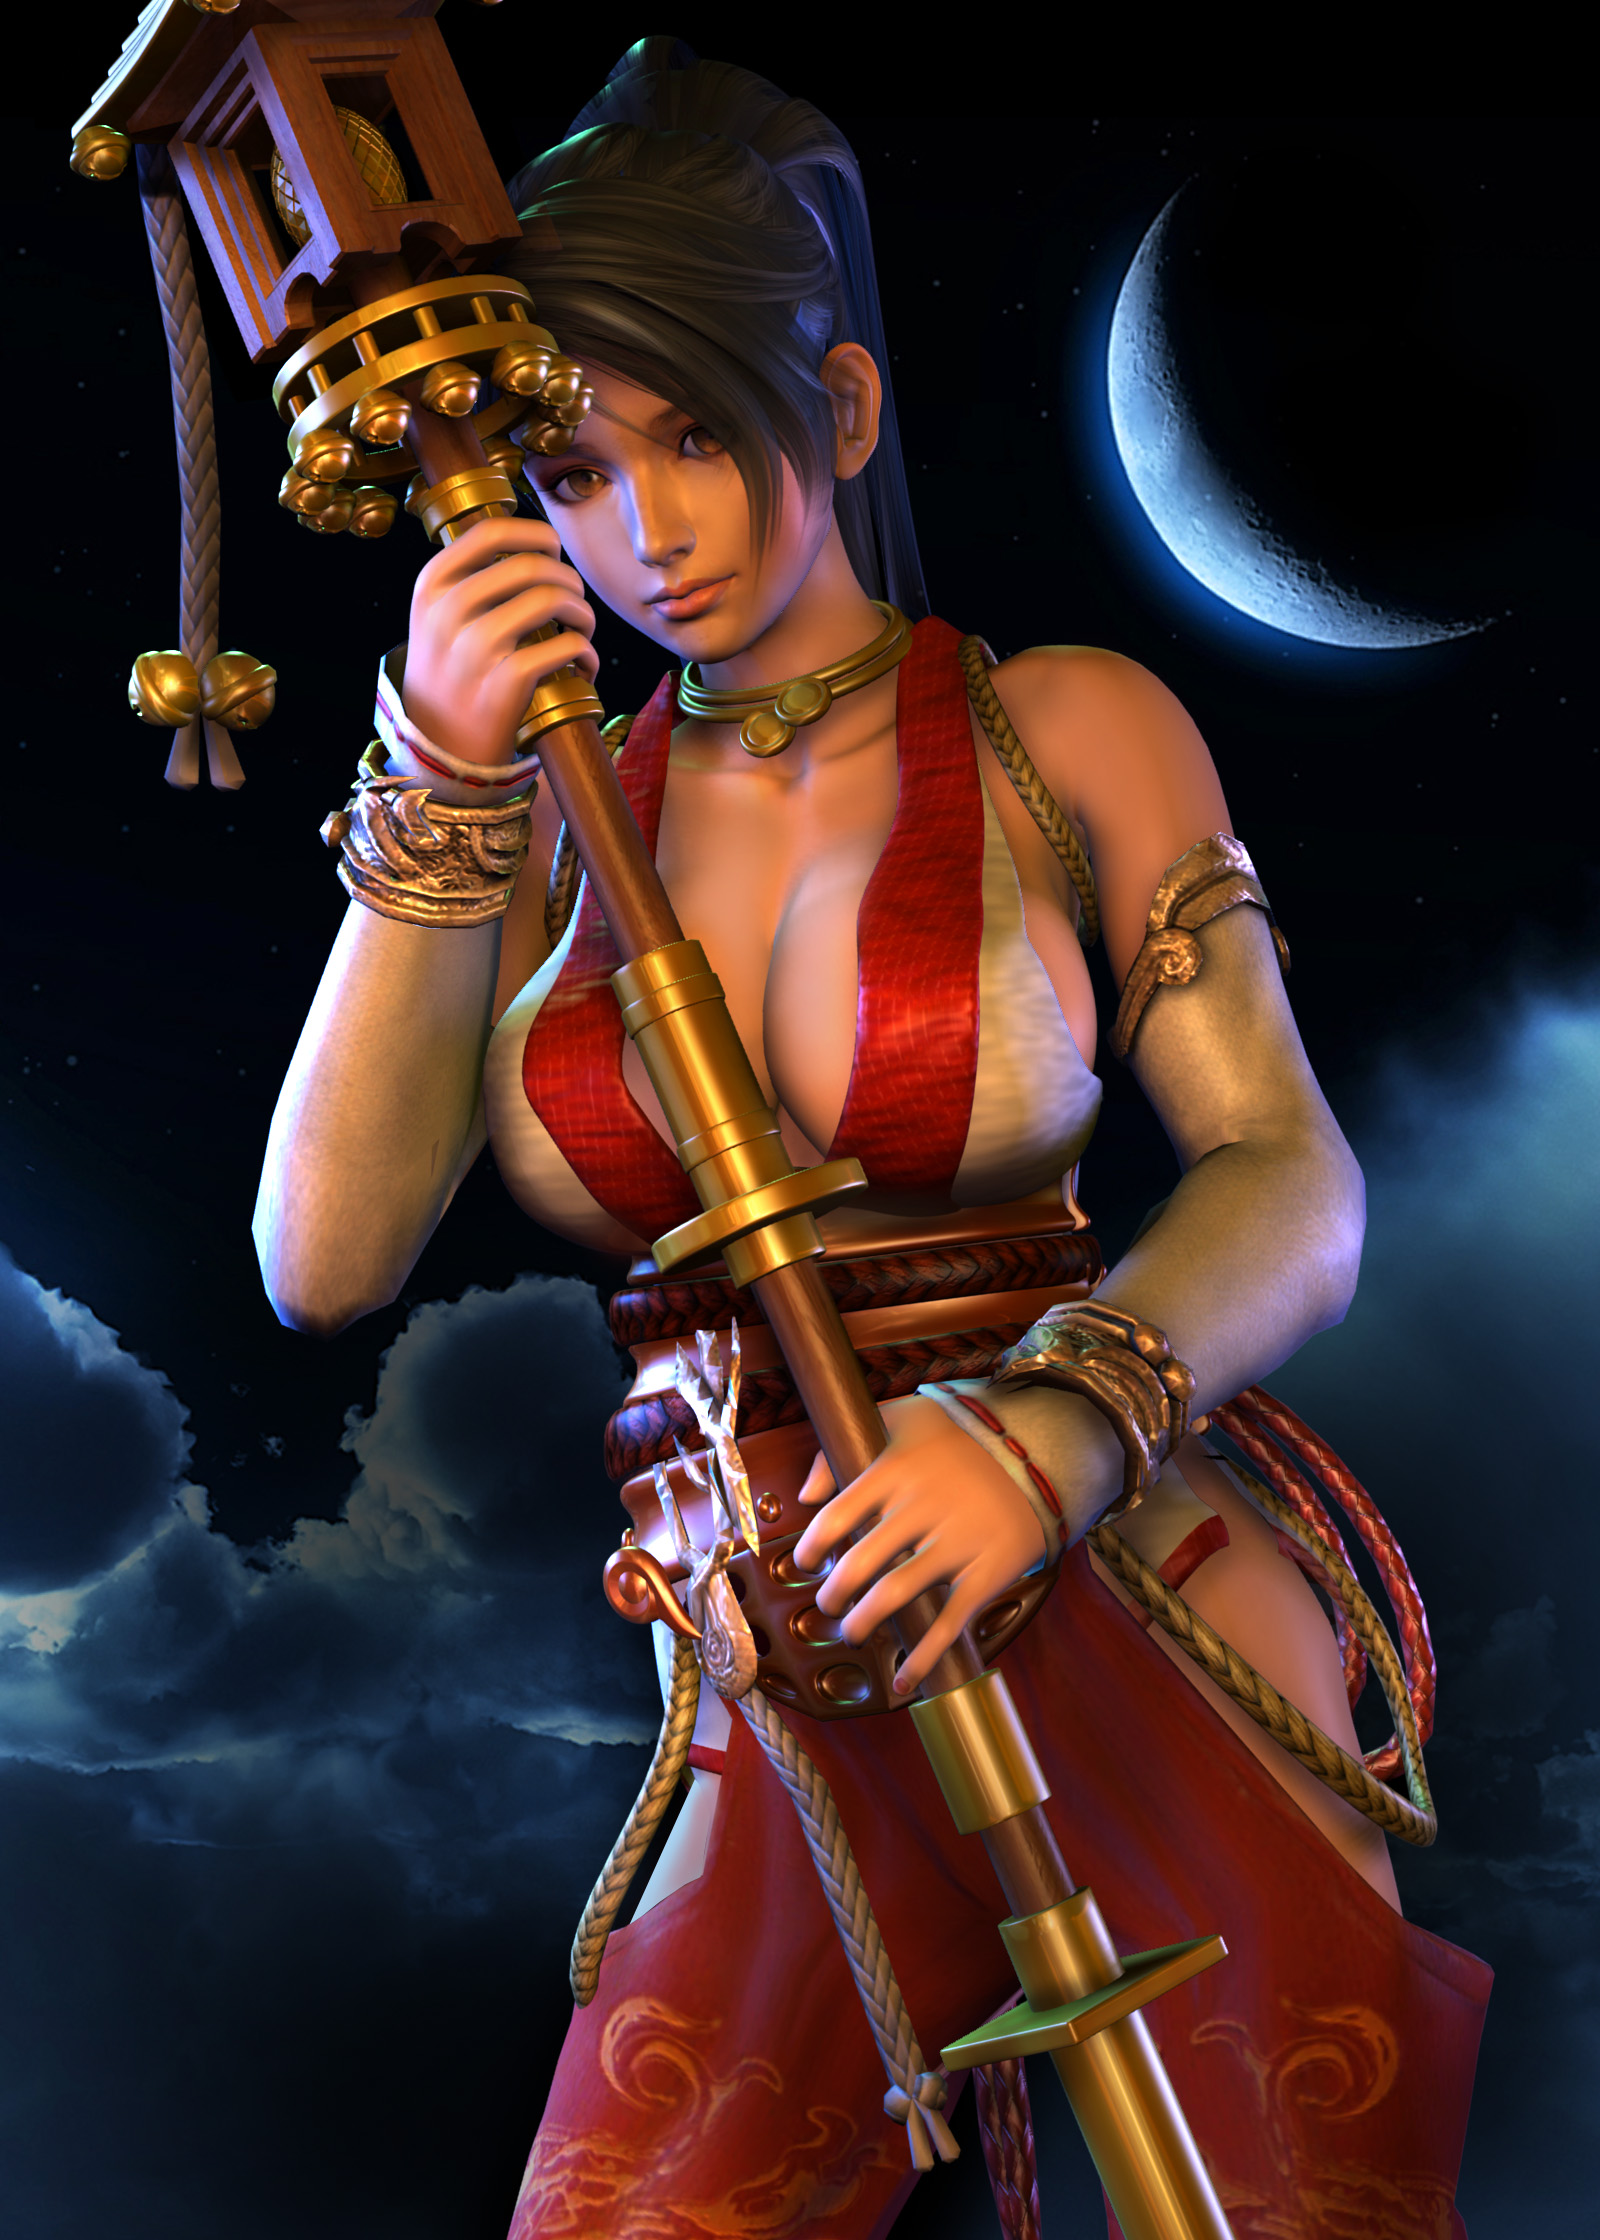 momiji_commission_2_by_3dbabes-d5p43o8.jpg